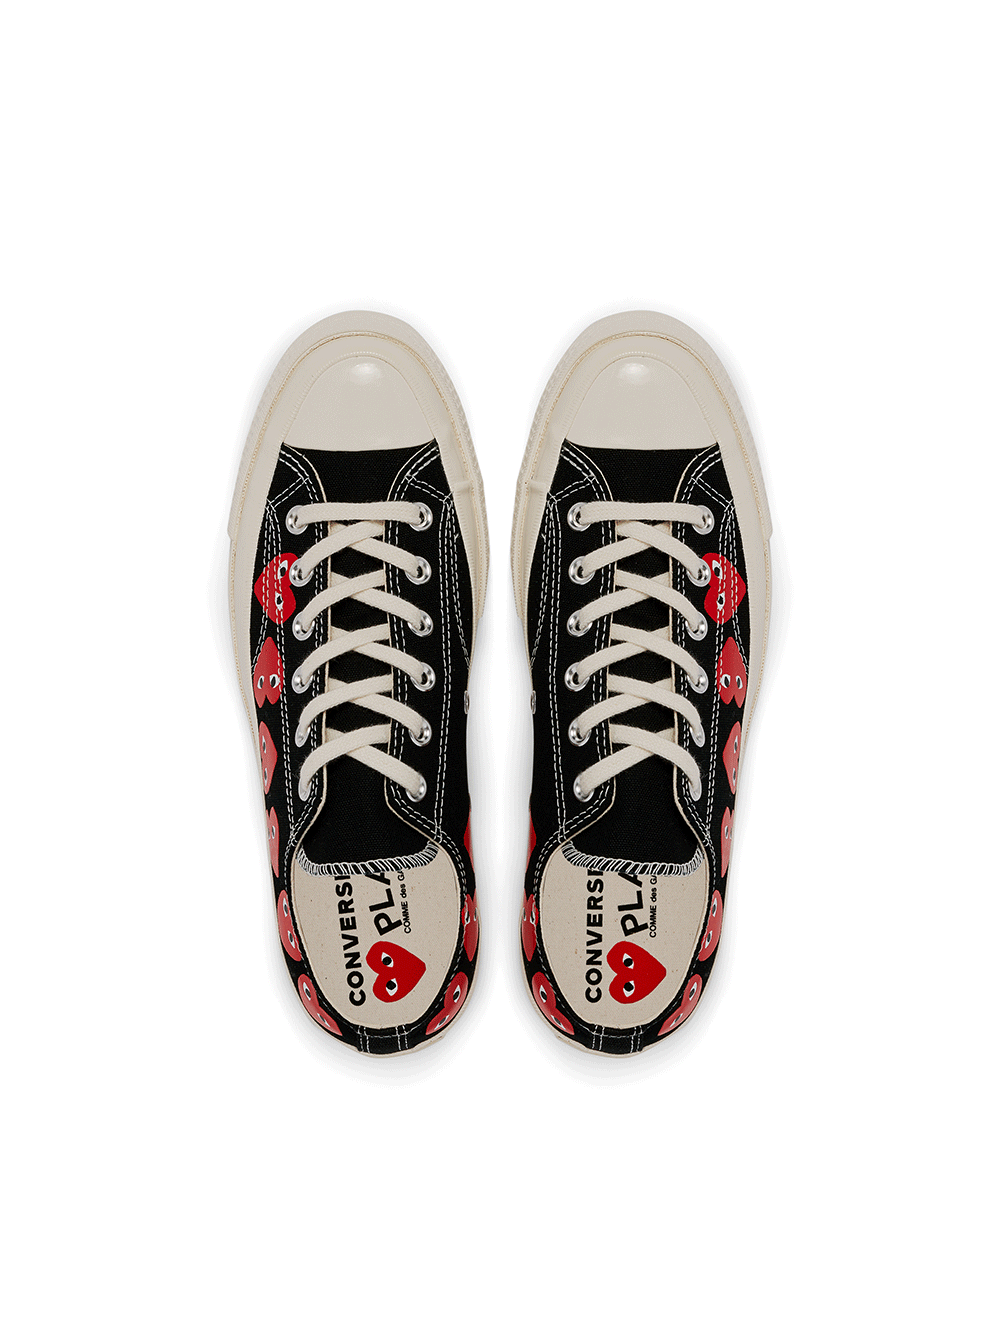 COMME-des-GARCONS-PLAY-CONVERSE-MULTI-HEART-Chuck-Taylor-All-Star-_70-Low-Sneakers-5